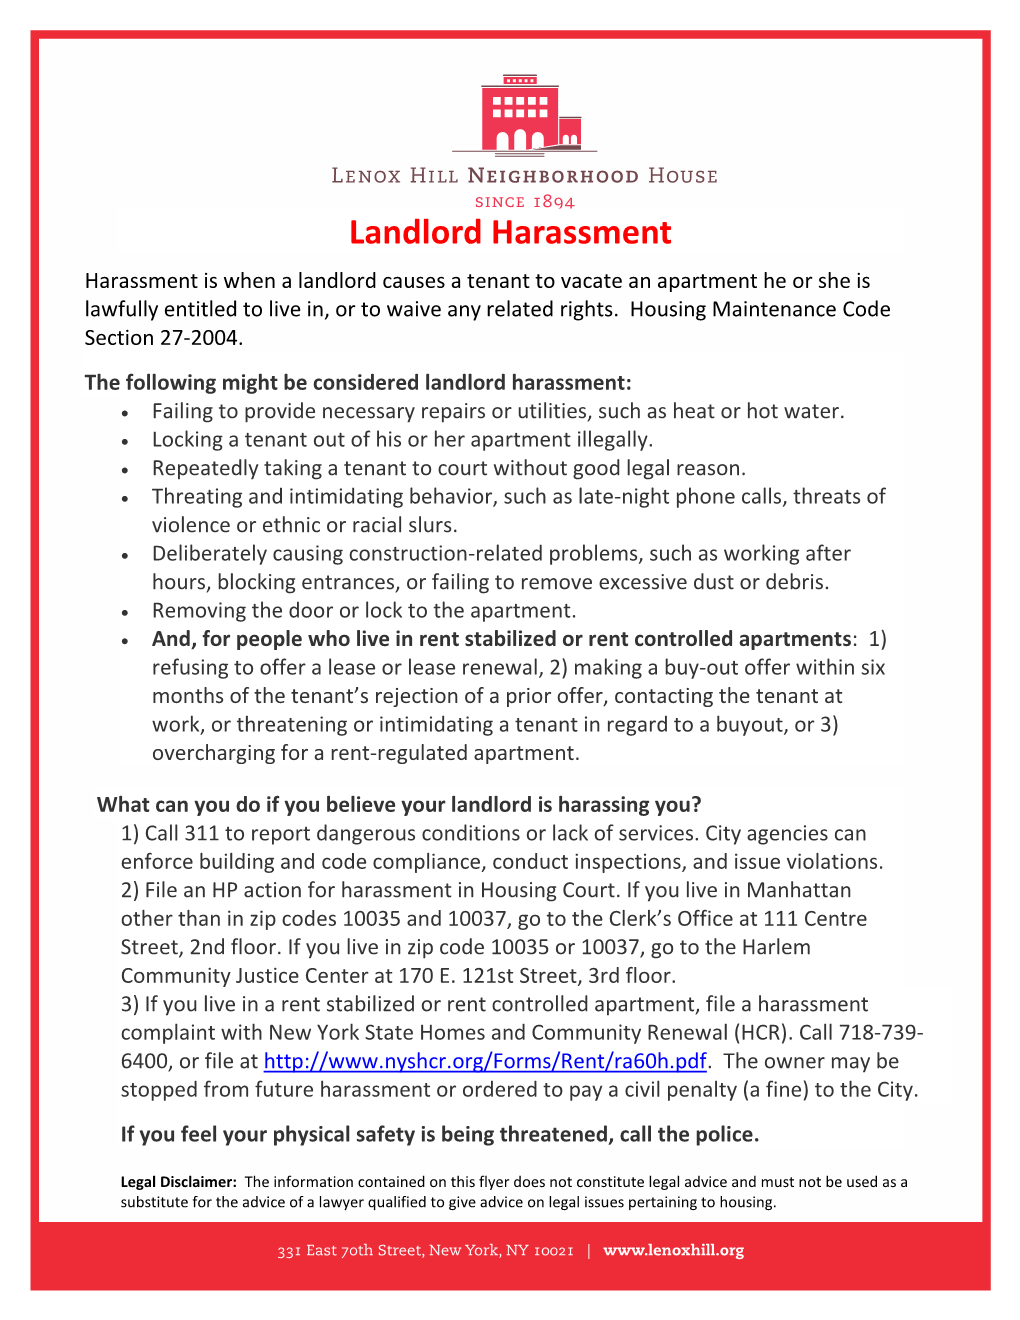 Landlord Harassment Harassment Is When a Landlord Causes a Tenant to Vacate an Apartment He Or She Is Lawfully Entitled to Live In, Or to Waive Any Related Rights